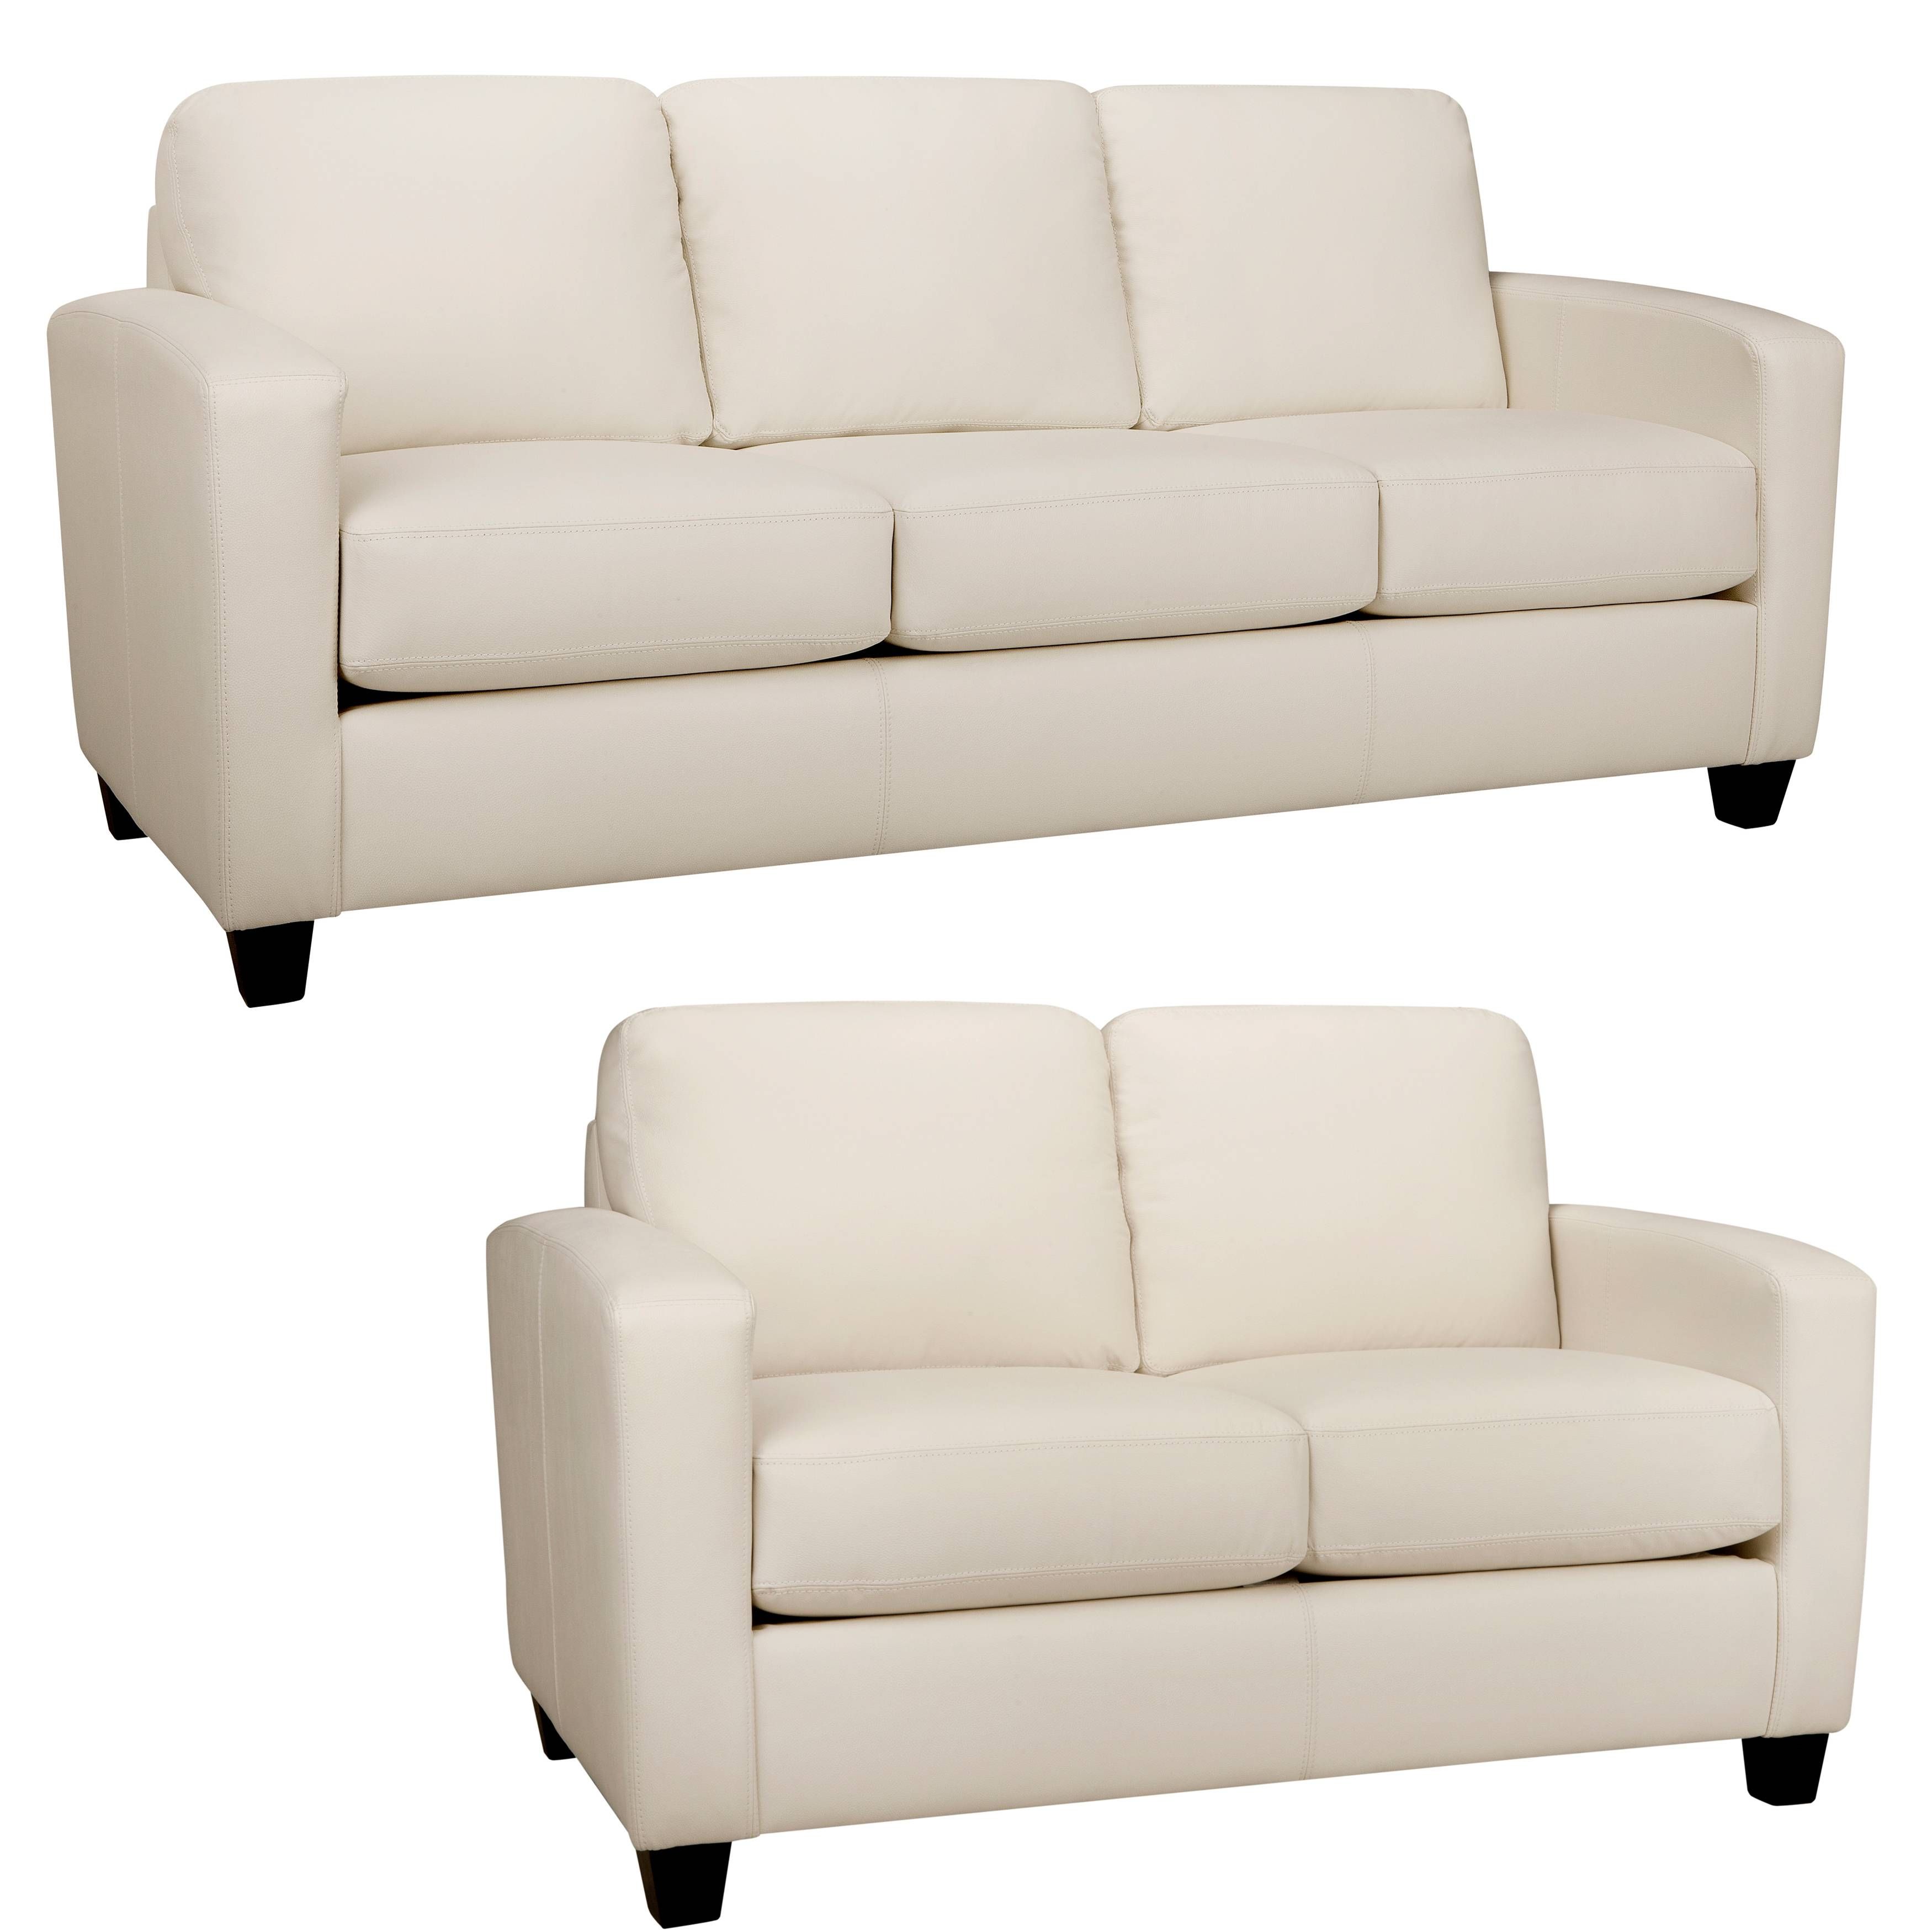 2017 Popular f White Leather Sofa and Loveseat